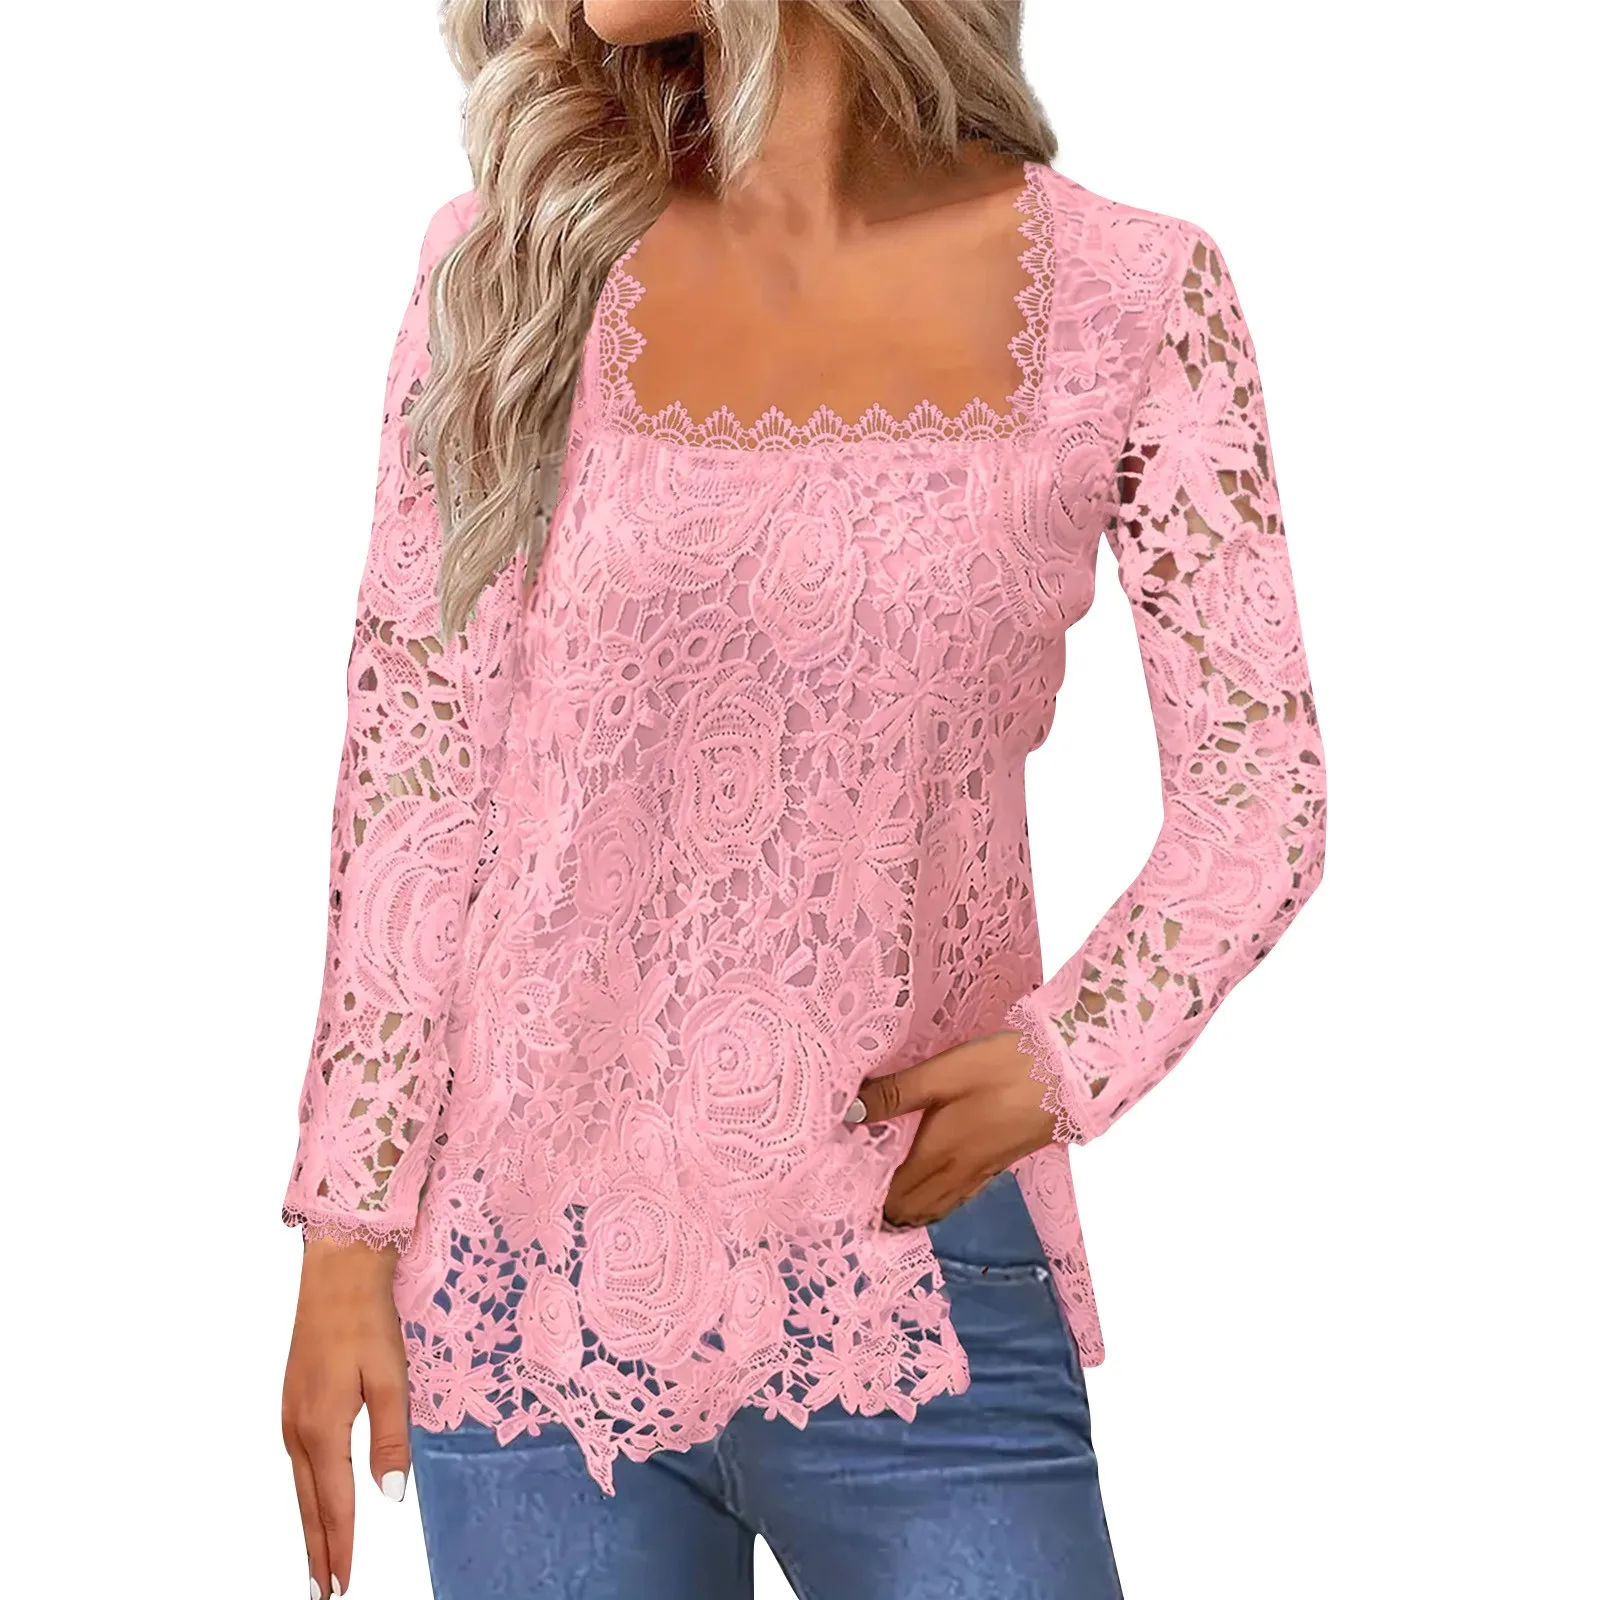 

Women'S Fashion Solid Lace Top With Square Neck And Lace Long Sleeves футболки Clothes For Women Ropa Para Mujer одежда